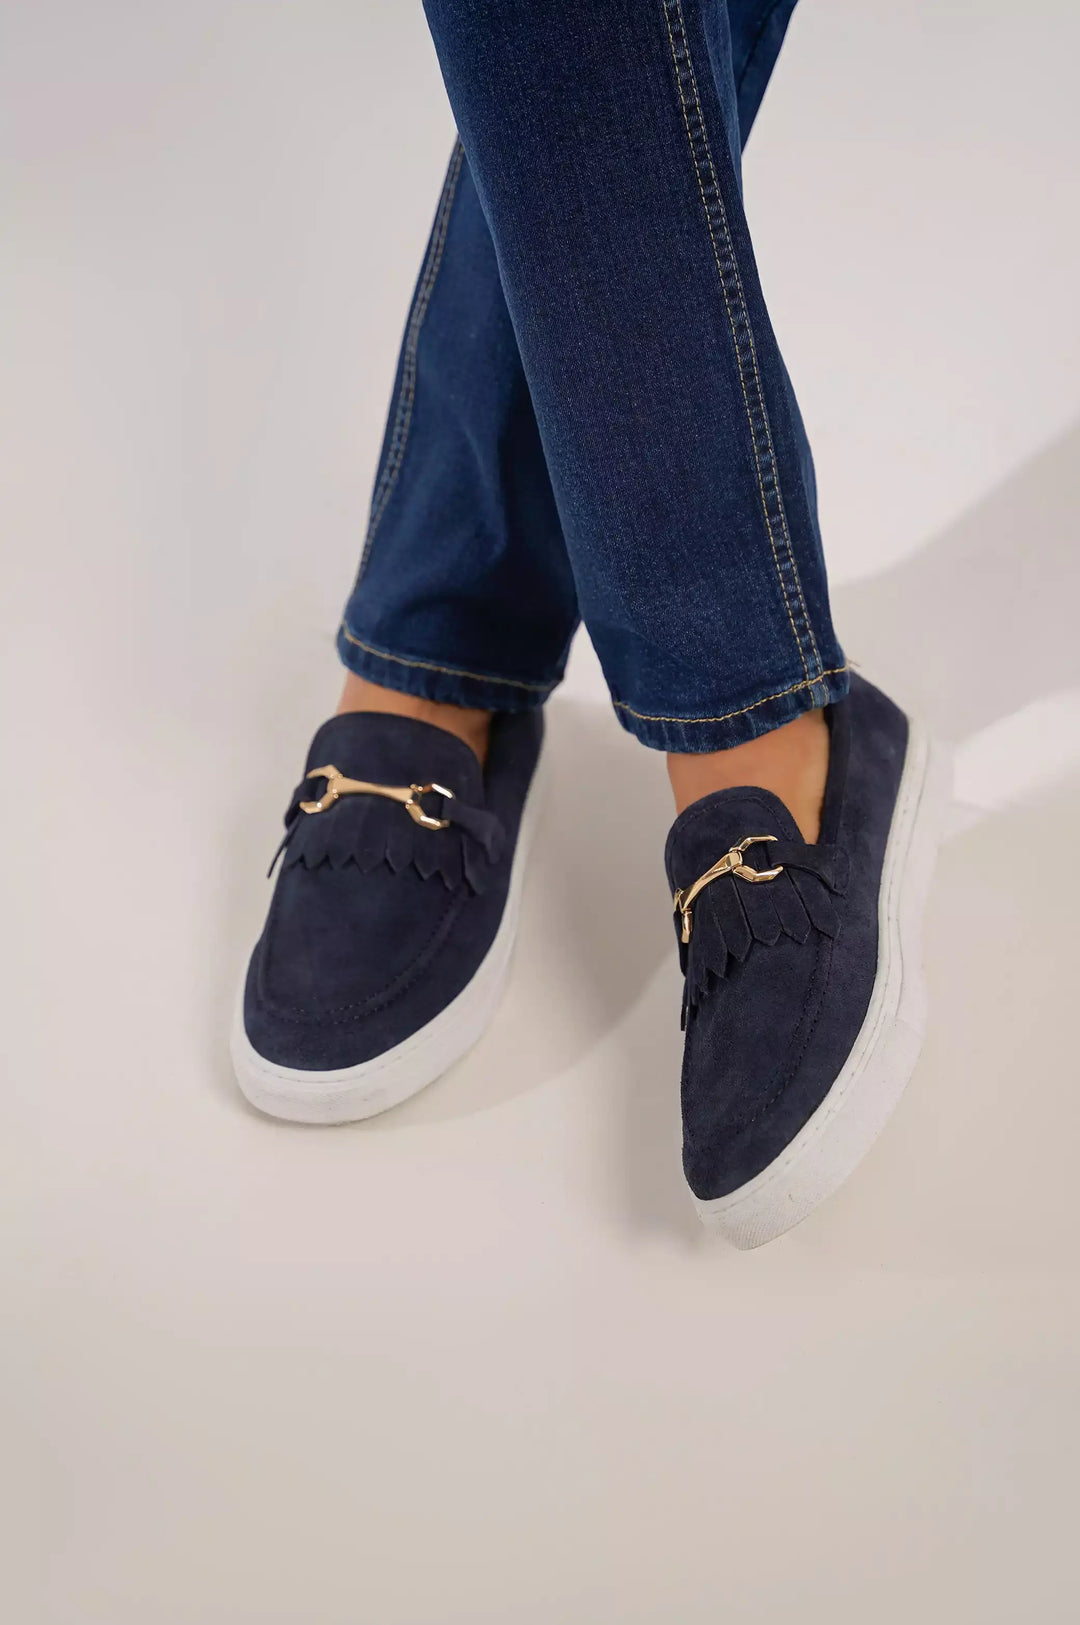 NAVY BUCKLED LOAFERS